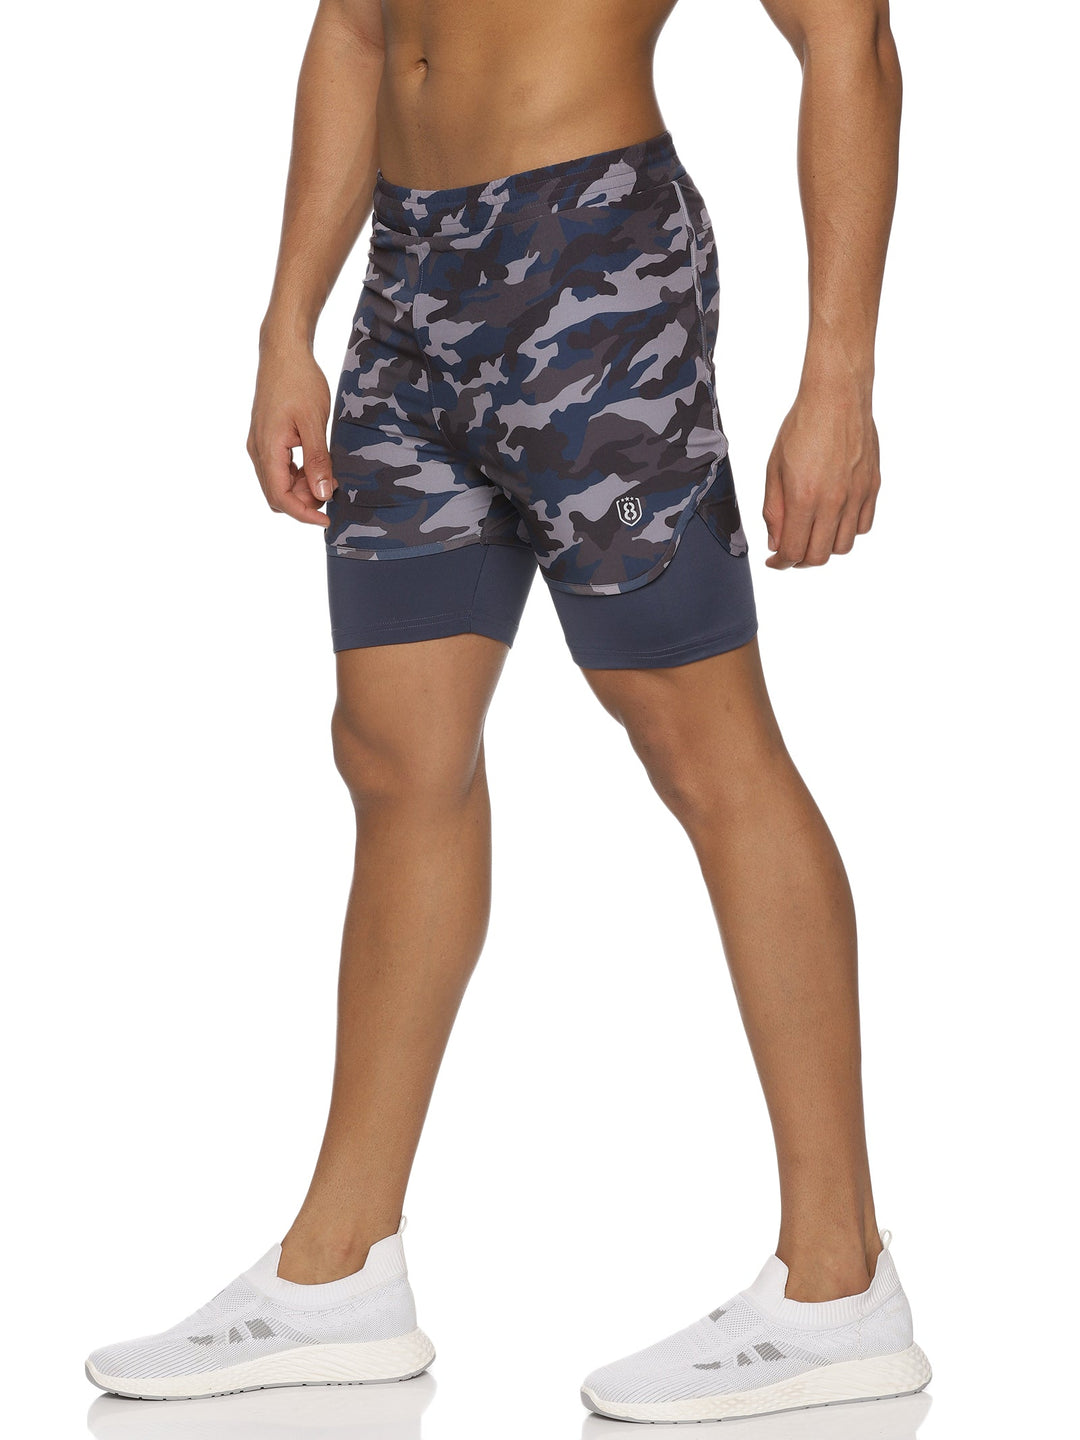 Men's Camouflage Printed Shorts With Elasticated Waist & Inner Tights (Camouflage)